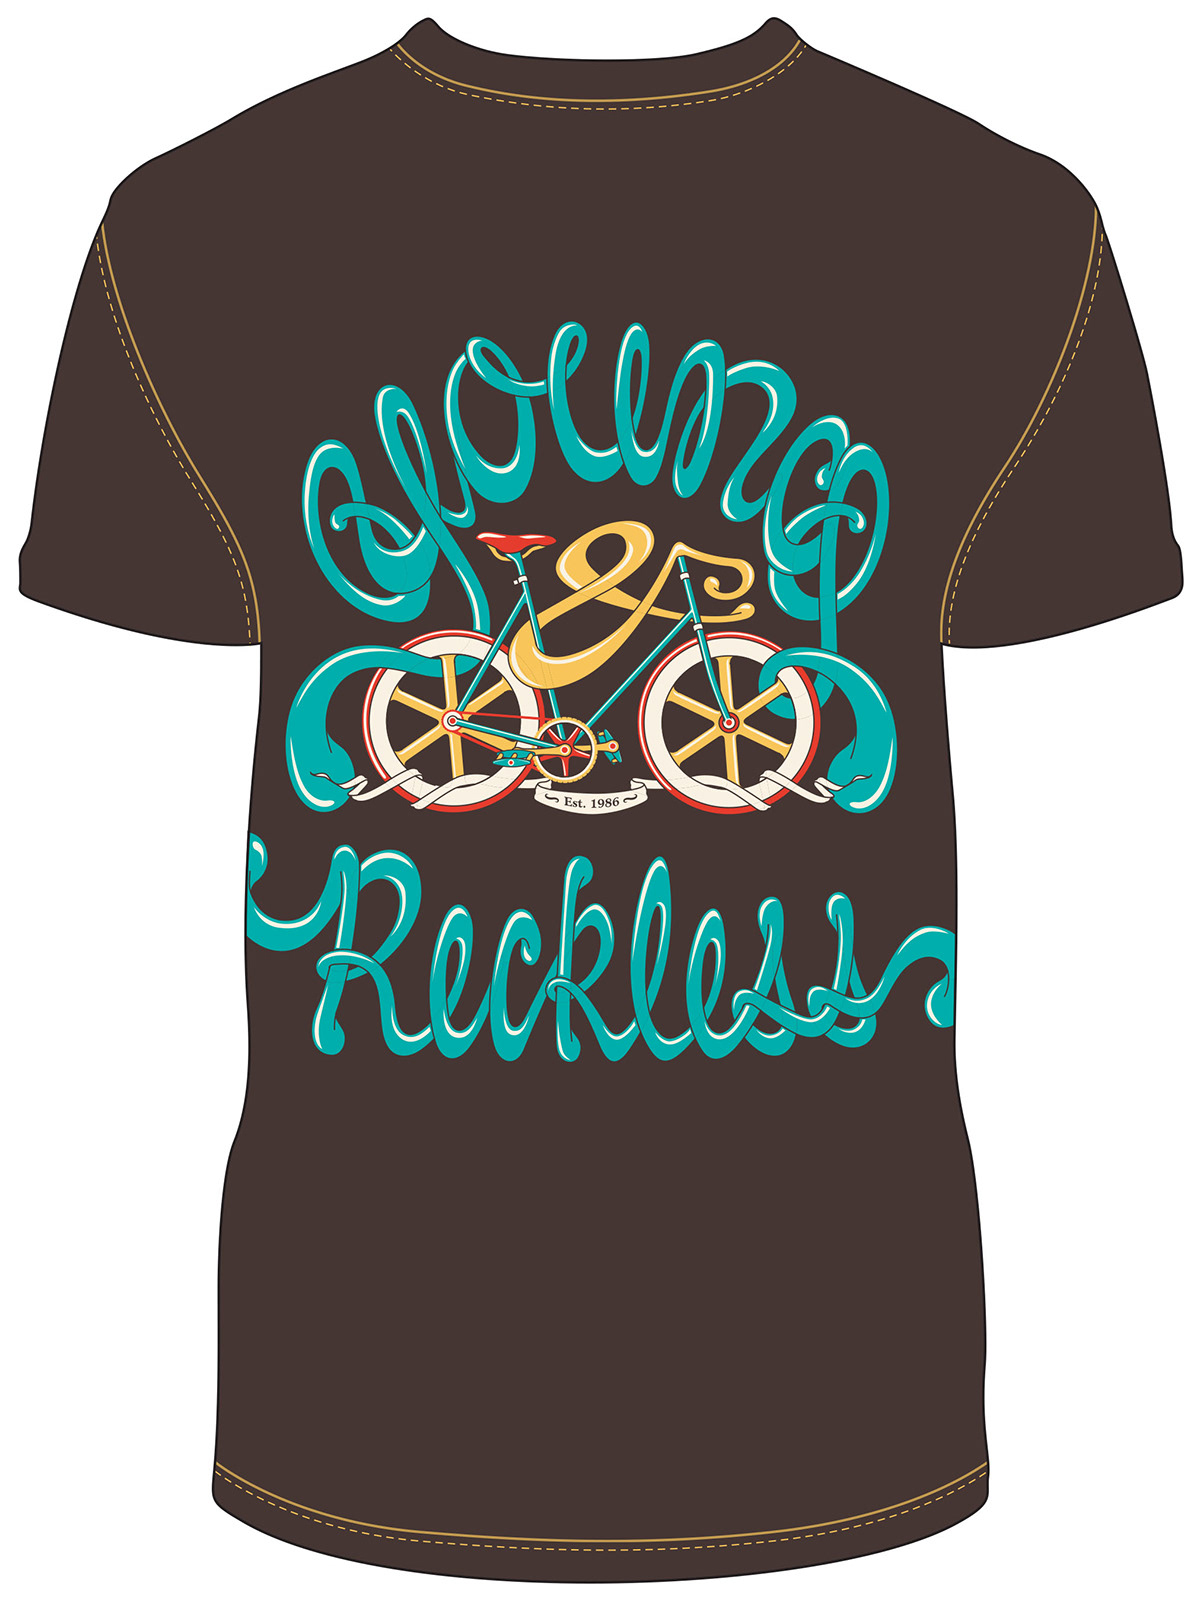 skateboard t-shirt young and reckless Bike logo hat design graphic